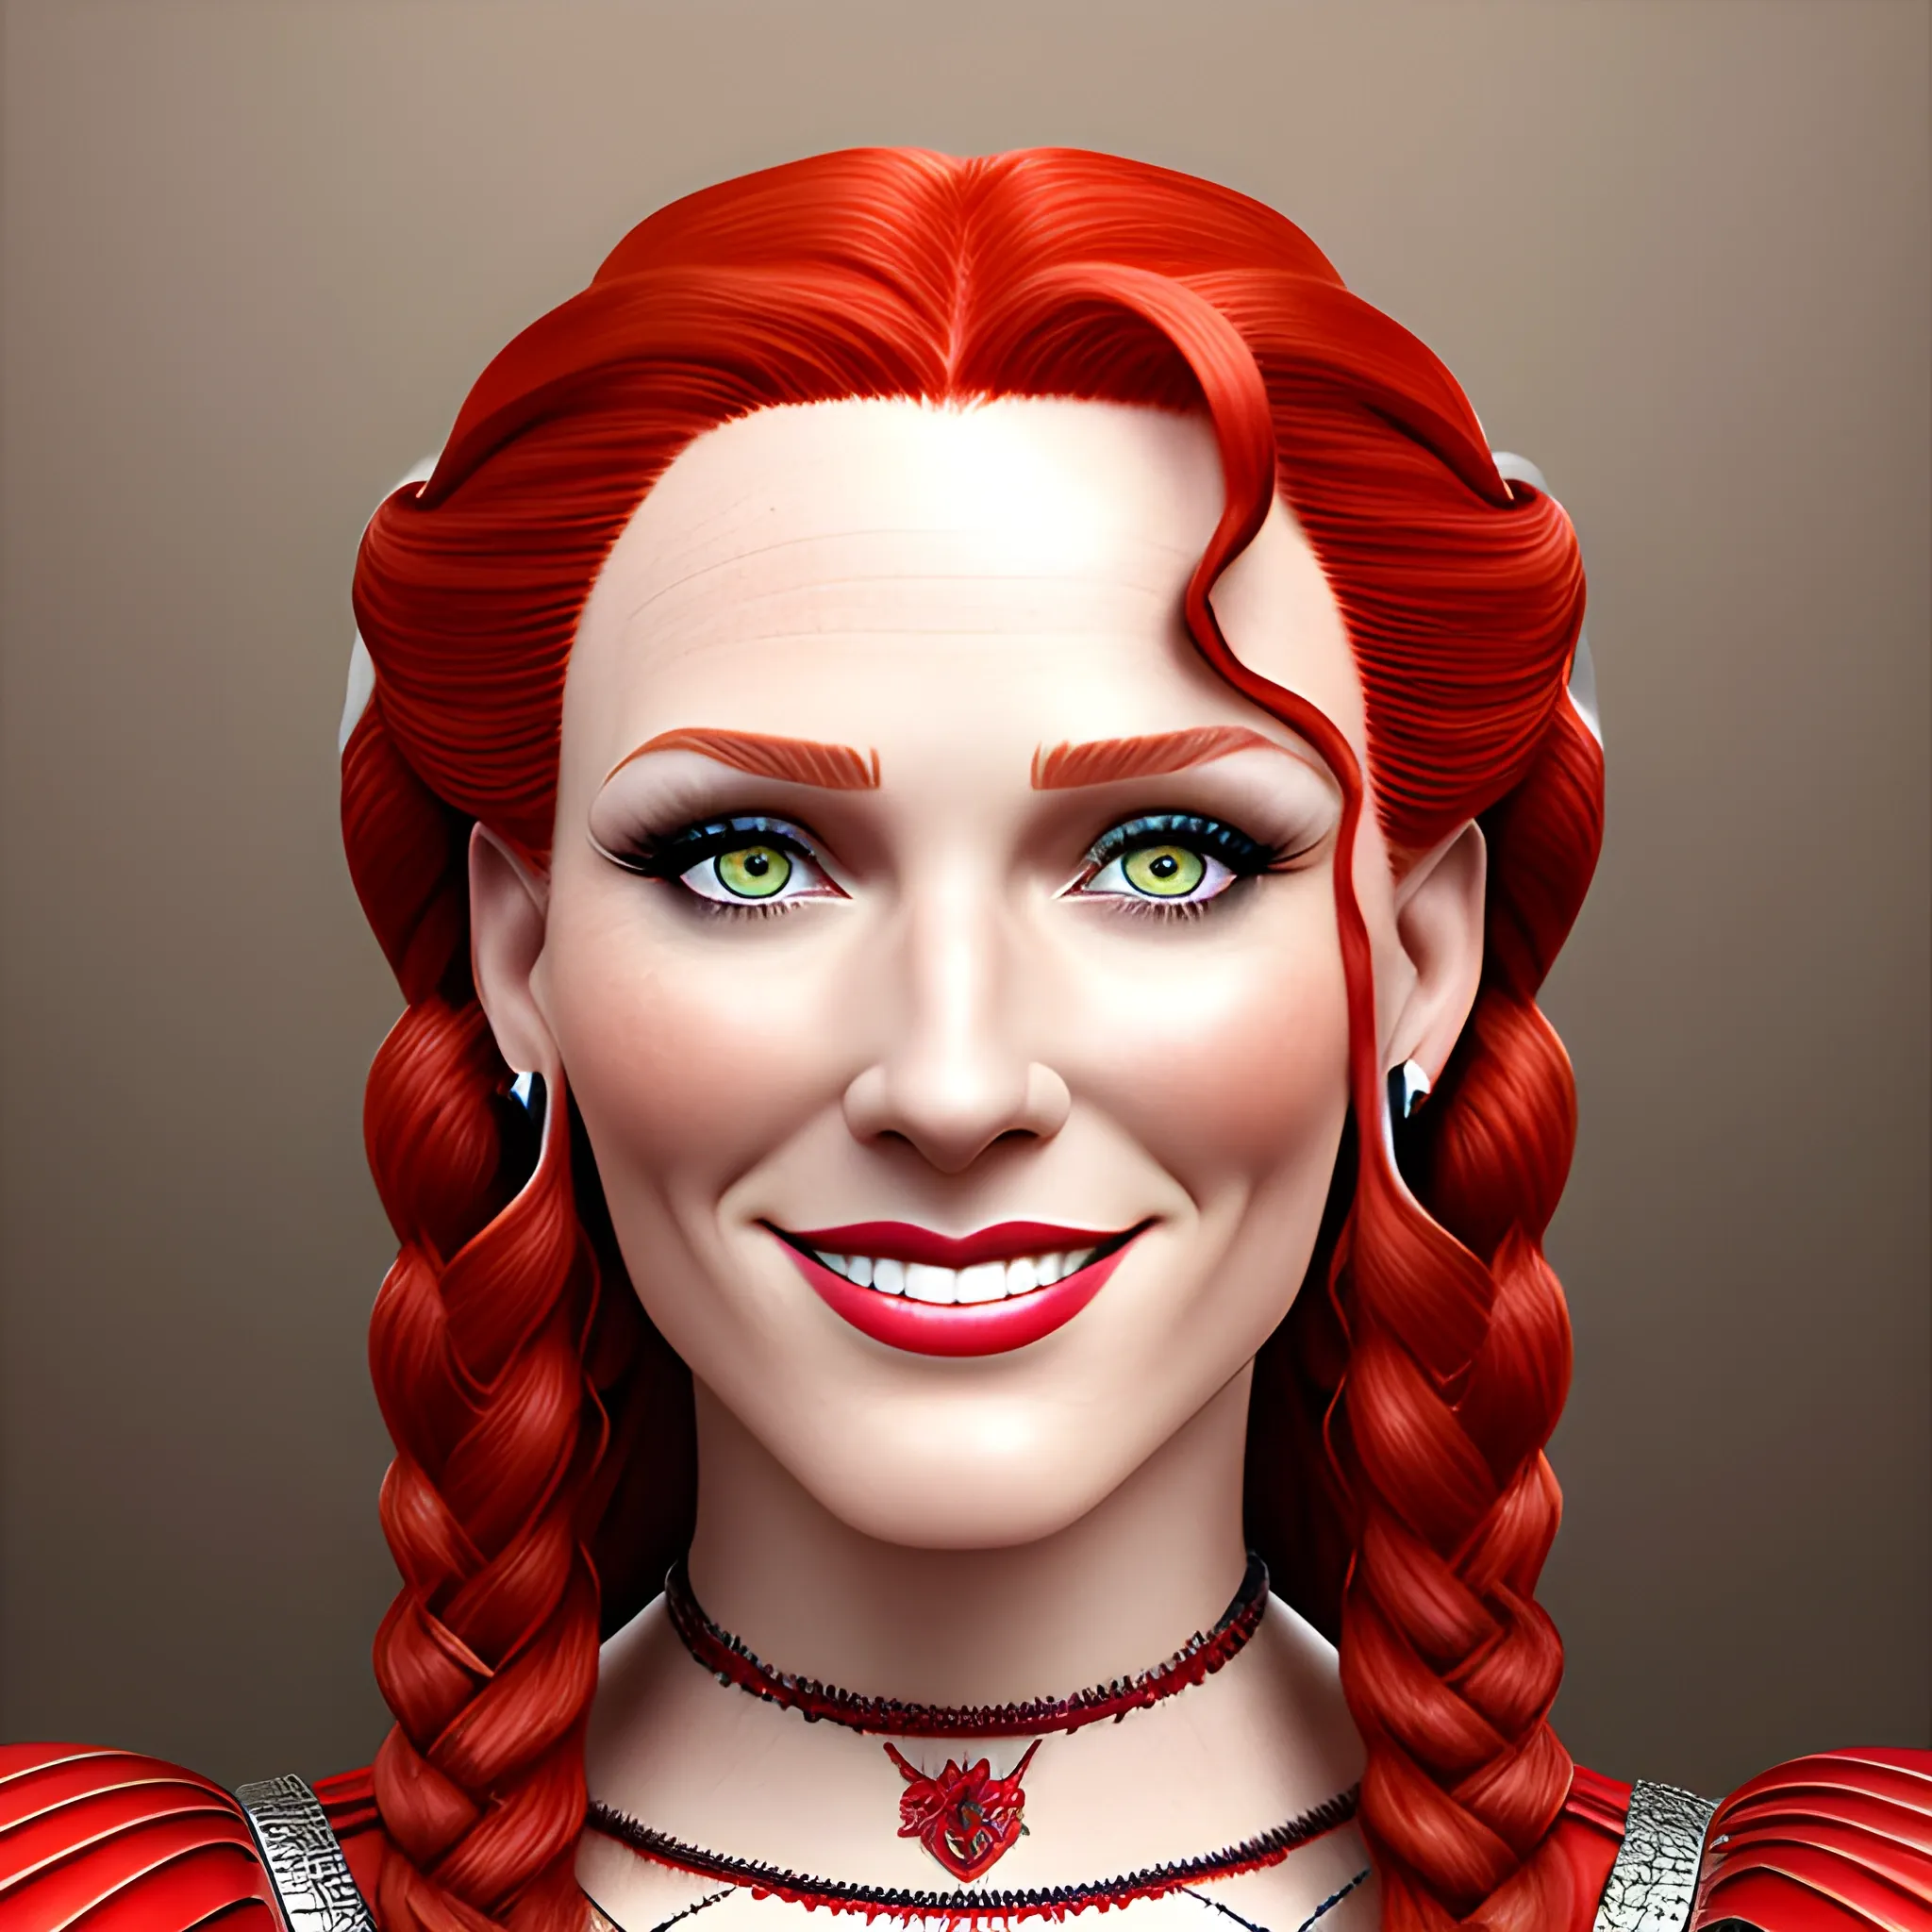 Make picture curly red-haired girl from the cartoon "Braveheart" shoots an arrow, perfect smile, beautiful bright eyes, happiness, fantasy, close-up portrait with red braids, in detailed vintage dress, perfect face, high quality, high resolution, 3D, , Pencil Sketch